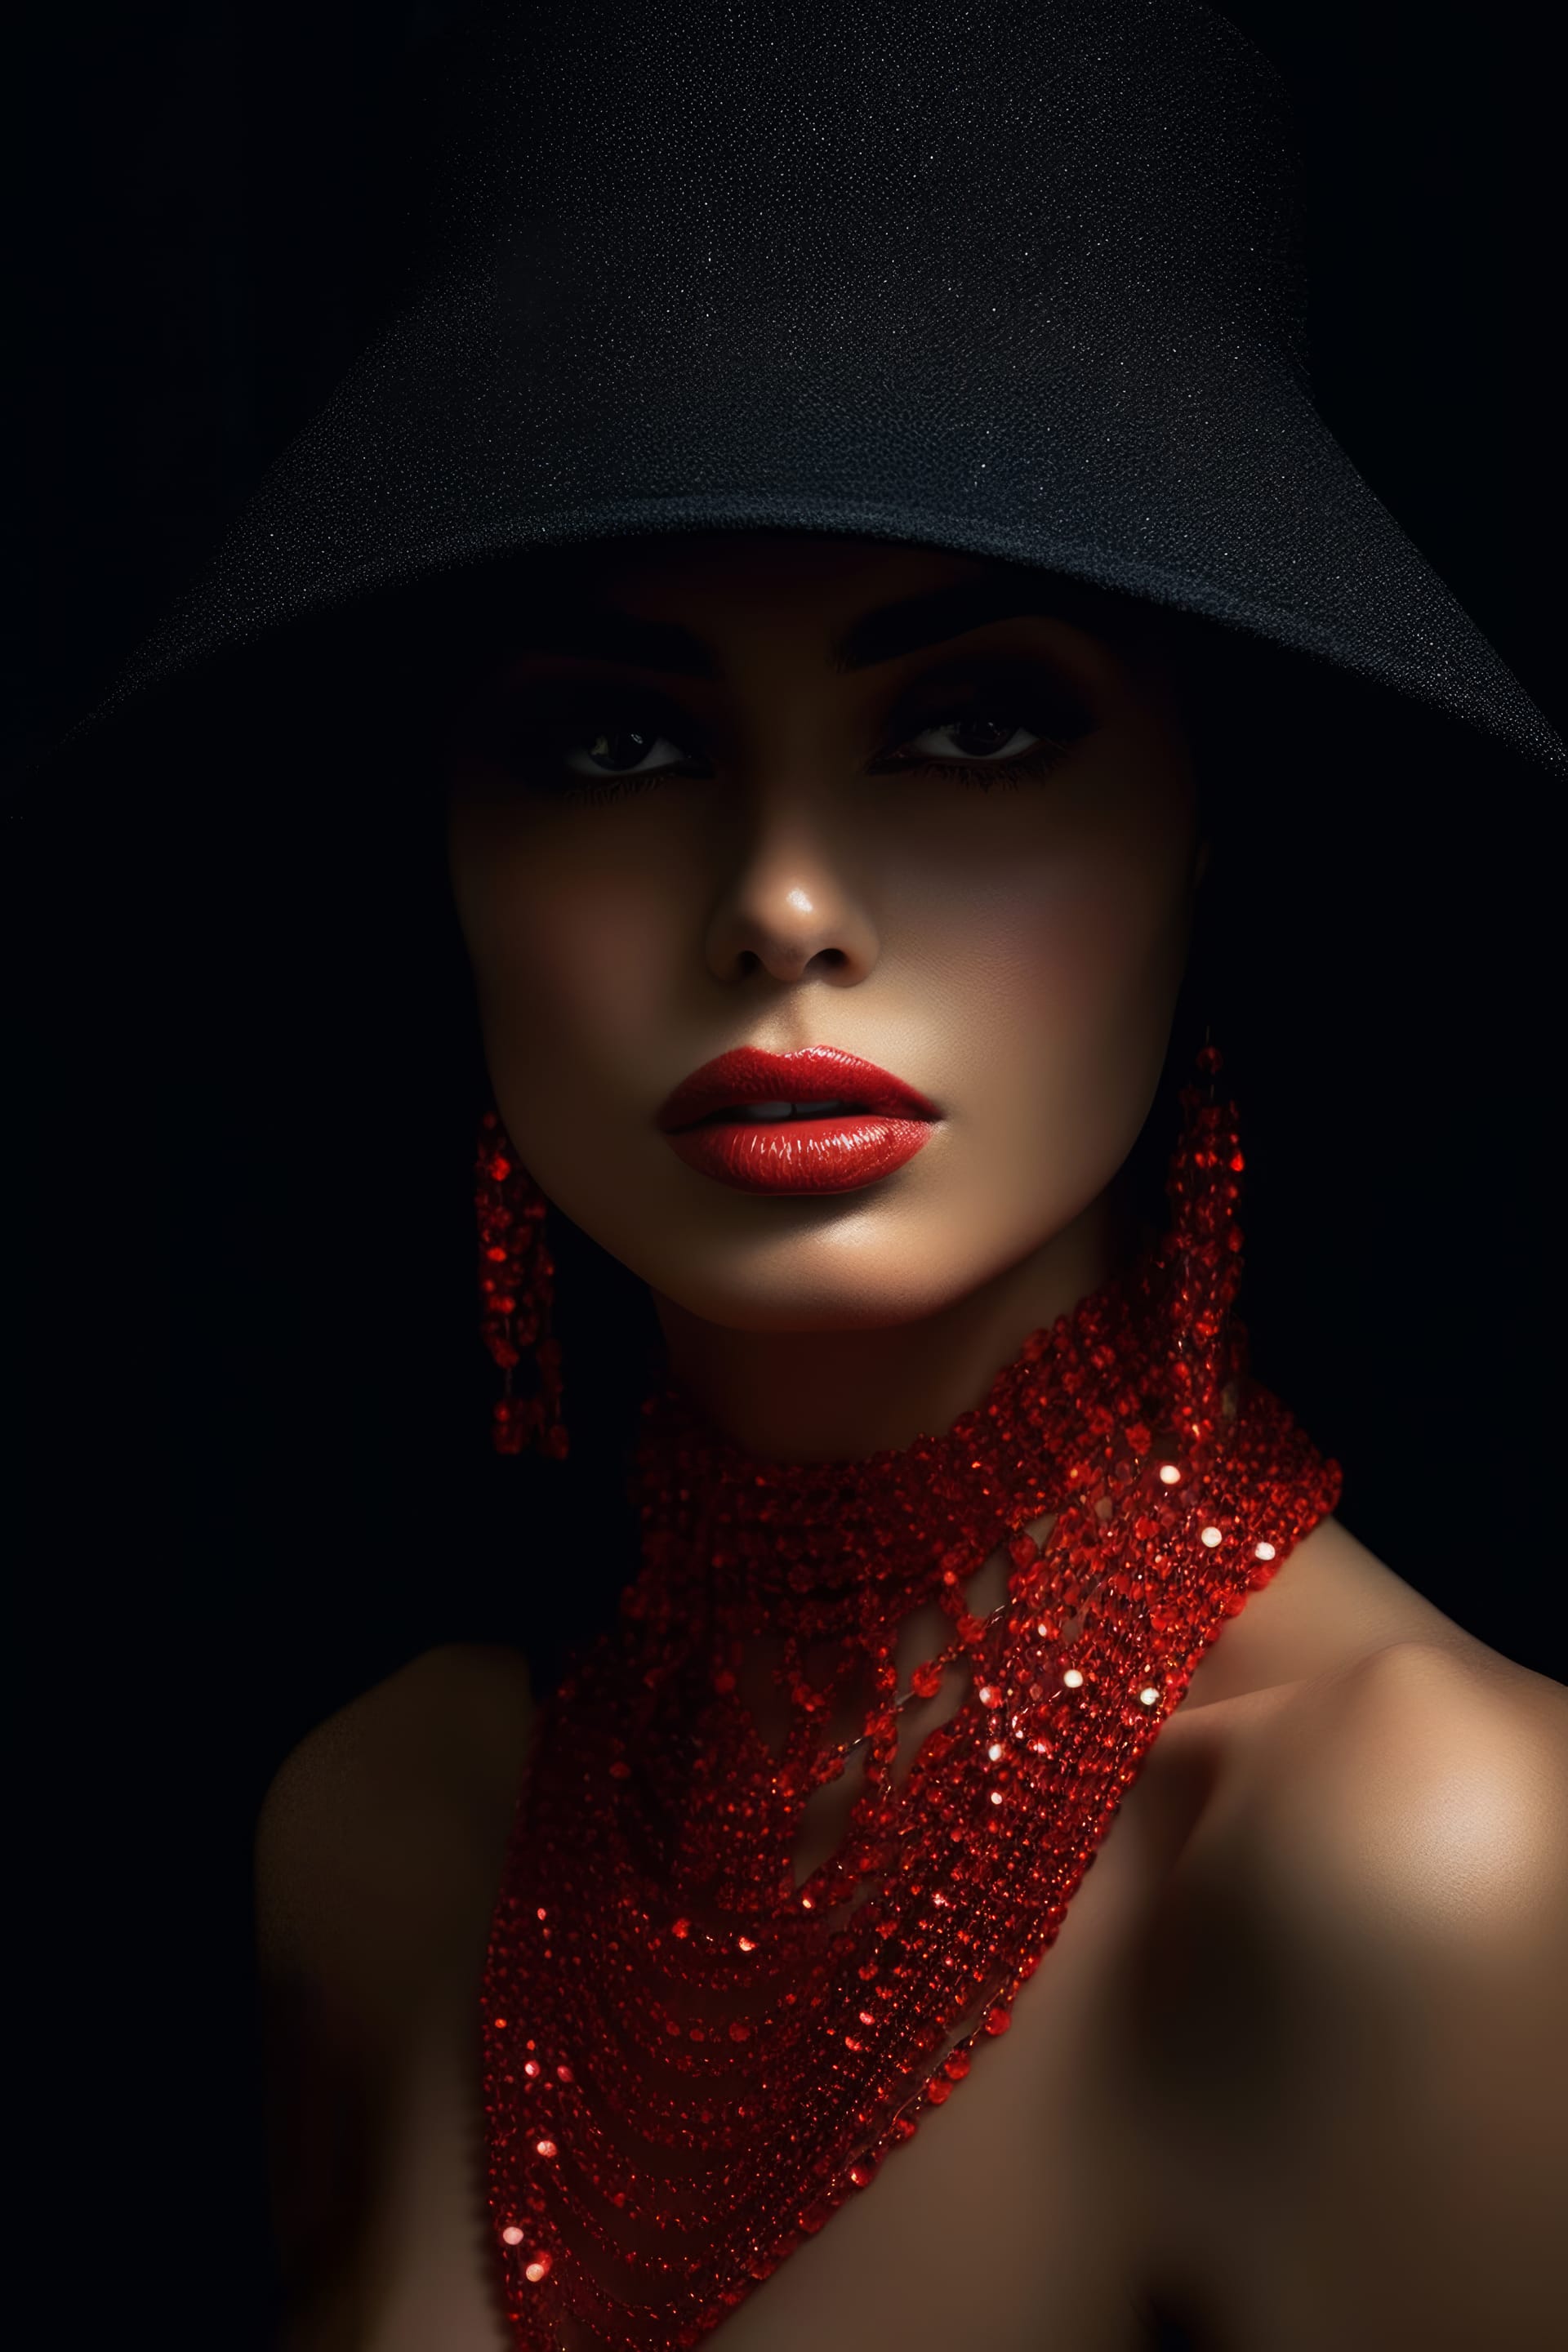 Woman black hat red beaded necklace stands front black background